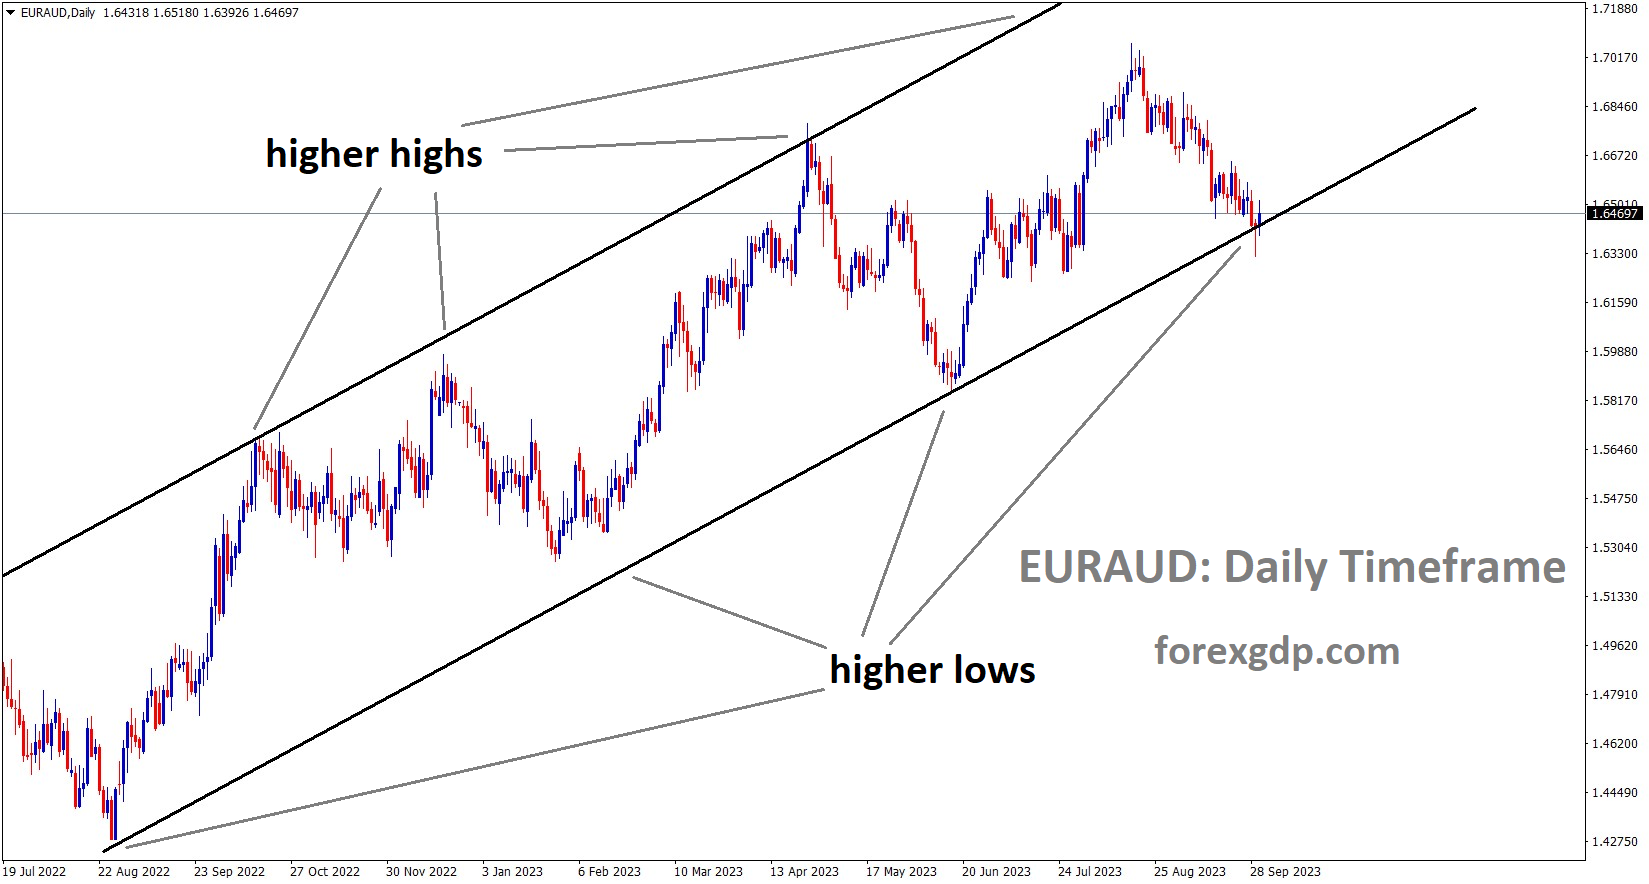 EURAUD is moving in an Ascending channel and the market has reached the higher low area of the channel